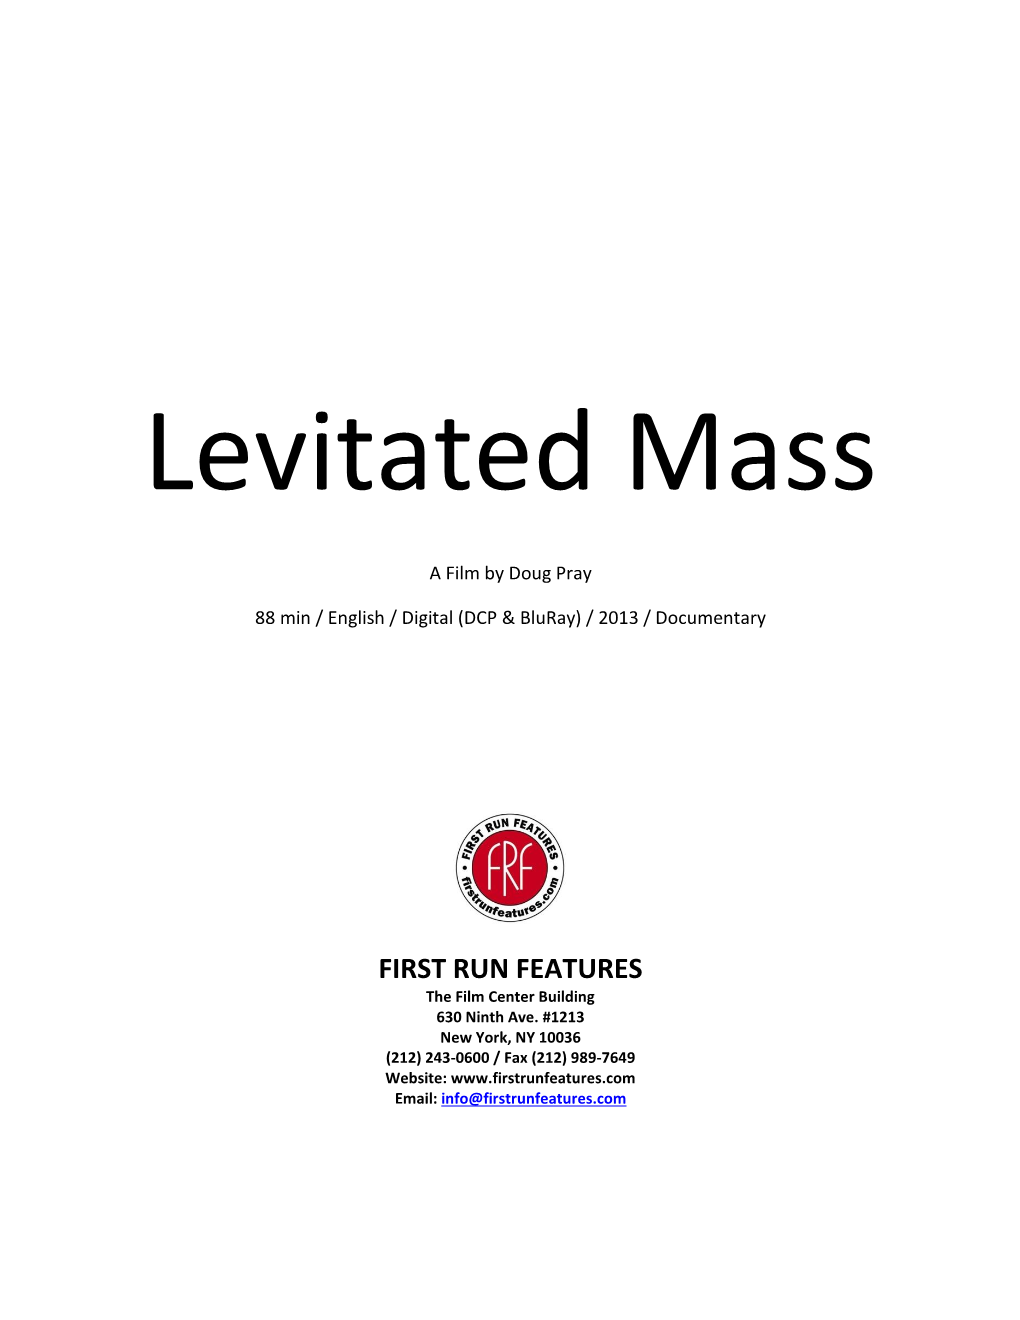 Praise for Levitated Mass